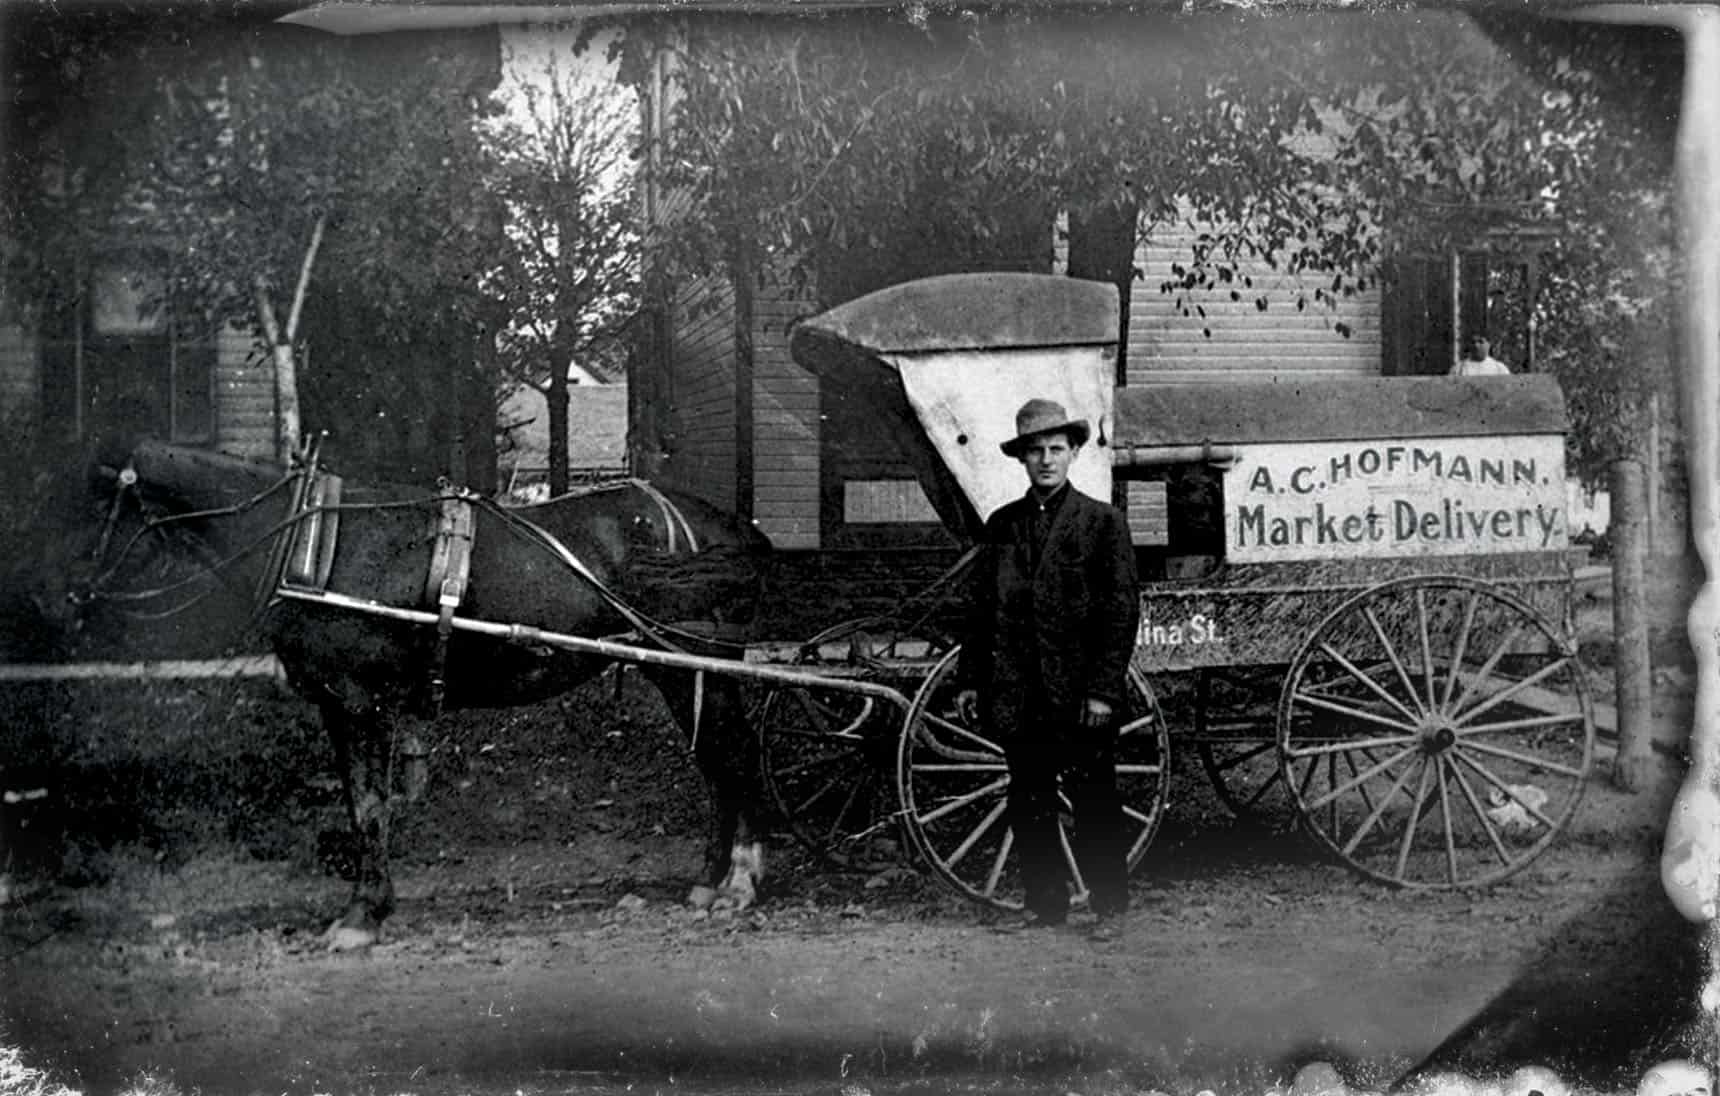 Vintage photo of Hofmann Delivery horse carriage